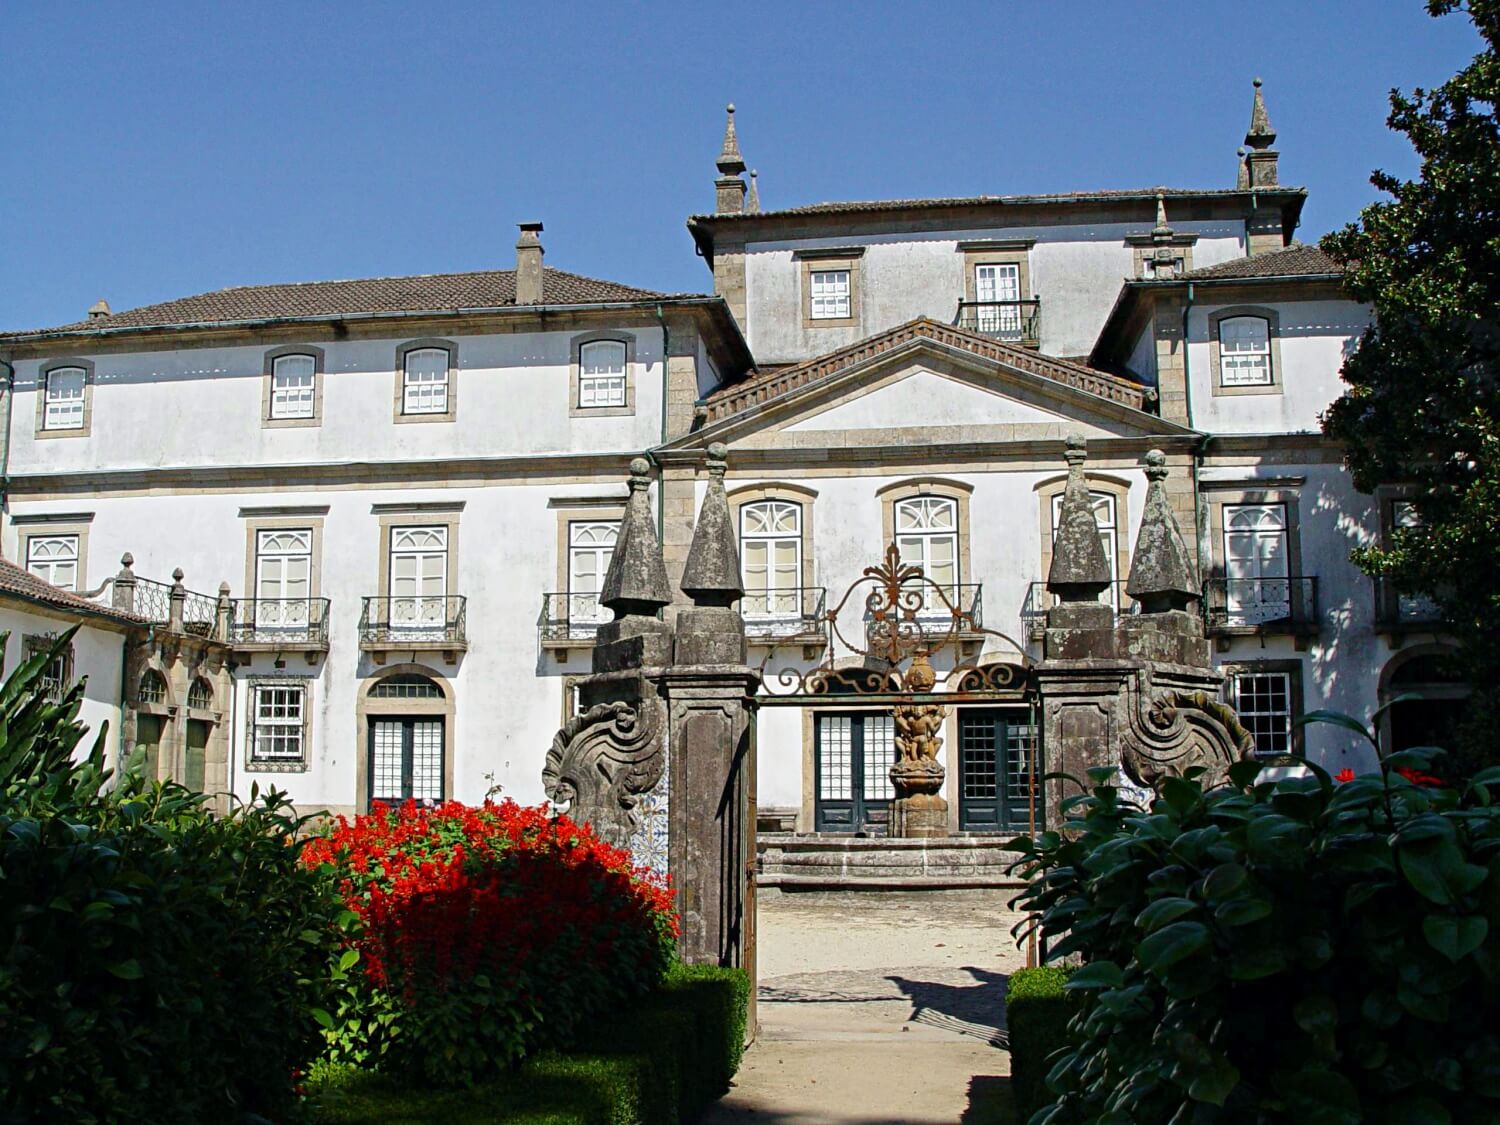 The Residence of Biscainhos